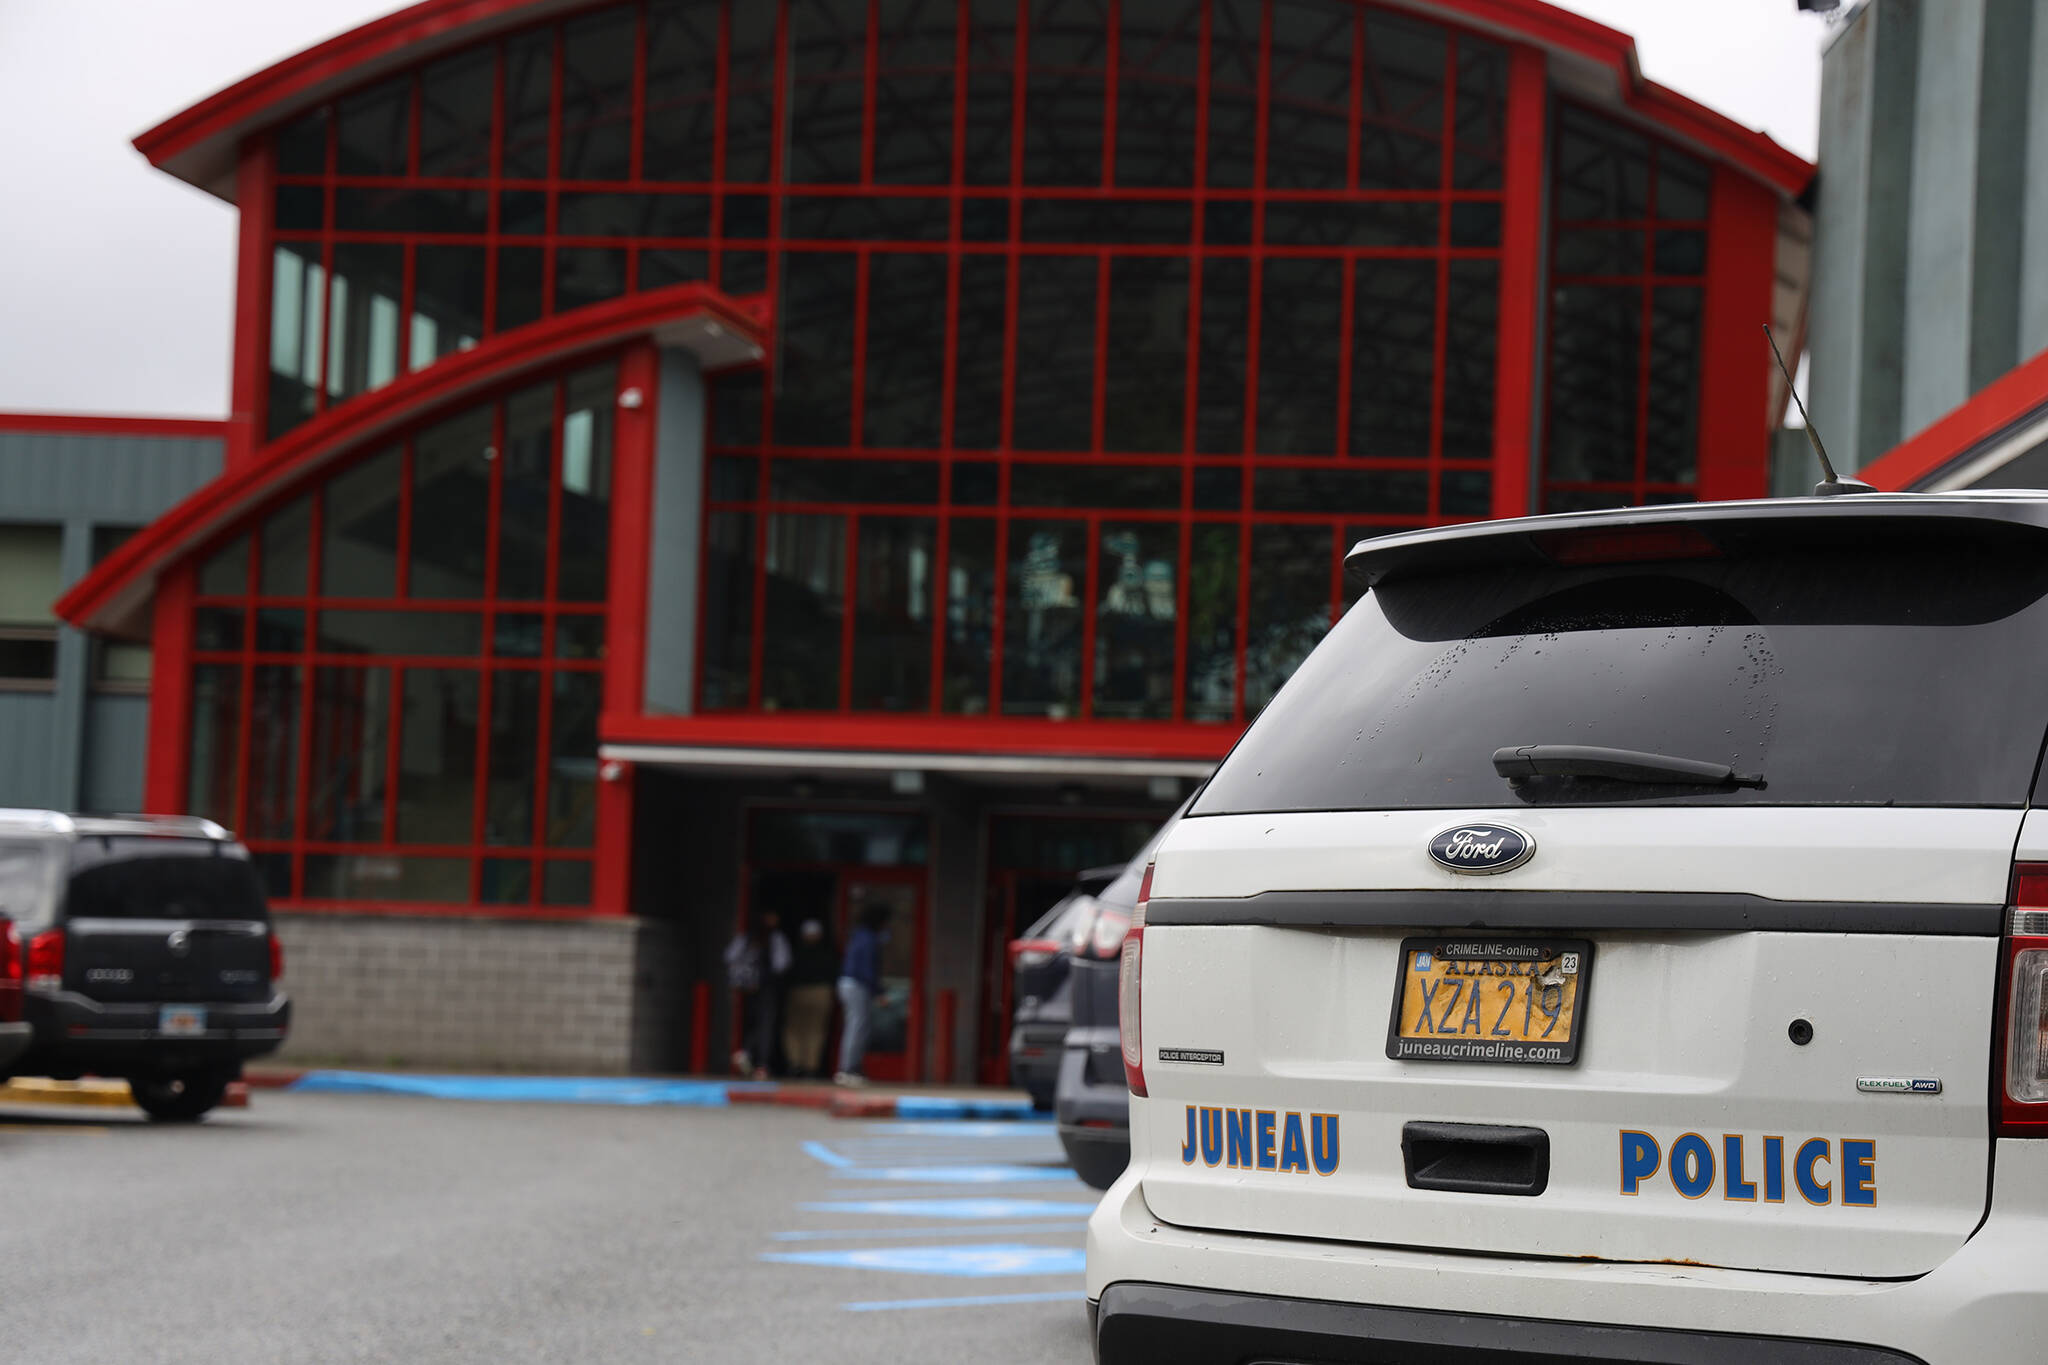 A Juneau Police Department vehicle parks in front of Juneau-Douglas High School: Yadaa.at Kalè on Friday, Sept. 9. (Clarise Larson / Juneau Empire)